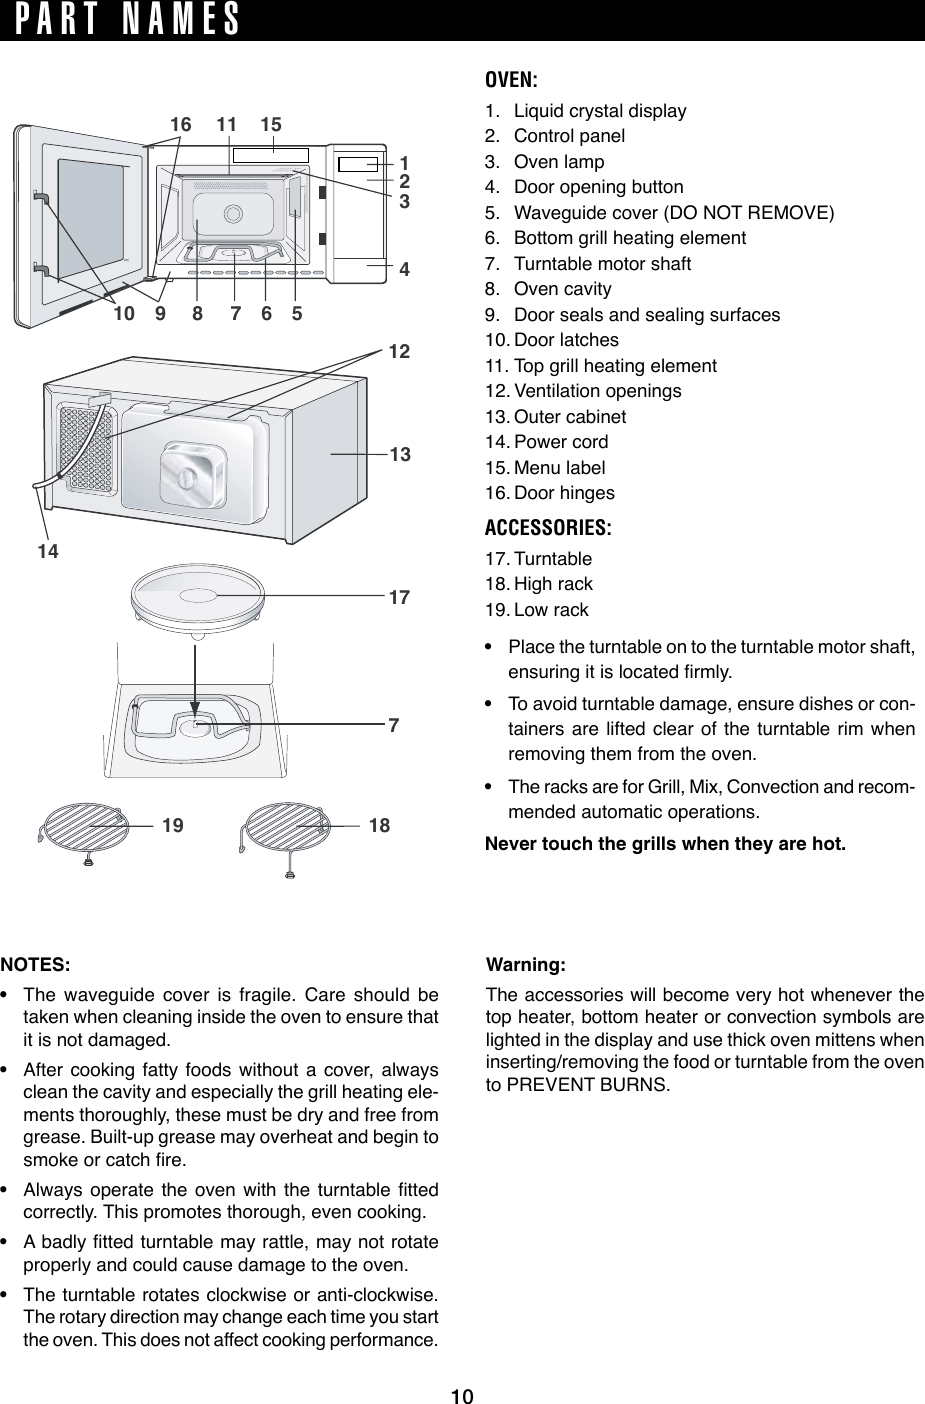 10OVEN:1.  Liquid crystal display2.  Control panel3.  Oven lamp4.  Door opening button5.  Waveguide cover (DO NOT REMOVE)6.  Bottom grill heating element7.  Turntable motor shaft8.  Oven cavity9.  Door seals and sealing surfaces10. Door latches11. Top grill heating element12. Ventilation openings13. Outer cabinet14. Power cord15. Menu label16. Door hingesACCESSORIES:17. Turntable18. High rack19. Low rack• Place the turntable on to the turntable motor shaft, ensuringitislocatedrmly.• To avoid turntable damage, ensure dishes or con-tainers are lifted clear of the turntable rim when removing them from the oven.• The racks are for Grill, Mix, Convection and recom-mended automatic operations.Never touch the grills when they are hot.PART NAMES12141317756701 9 811 151618192143NOTES:• The waveguide cover is fragile. Care should be taken when cleaning inside the oven to ensure that it is not damaged.• After cooking fatty foods without a cover, always clean the cavity and especially the grill heating ele-ments thoroughly, these must be dry and free from grease. Built-up grease may overheat and begin to smokeorcatchre.• Alwaysoperate theoven withthe turntablettedcorrectly. This promotes thorough, even cooking.• Abadlyttedturntablemayrattle,maynotrotateproperly and could cause damage to the oven.• The turntable rotates clockwise or anti-clockwise. The rotary direction may change each time you start the oven. This does not affect cooking performance.Warning:The accessories will become very hot whenever the top heater, bottom heater or convection symbols are lighted in the display and use thick oven mittens when inserting/removing the food or turntable from the oven to PREVENT BURNS.